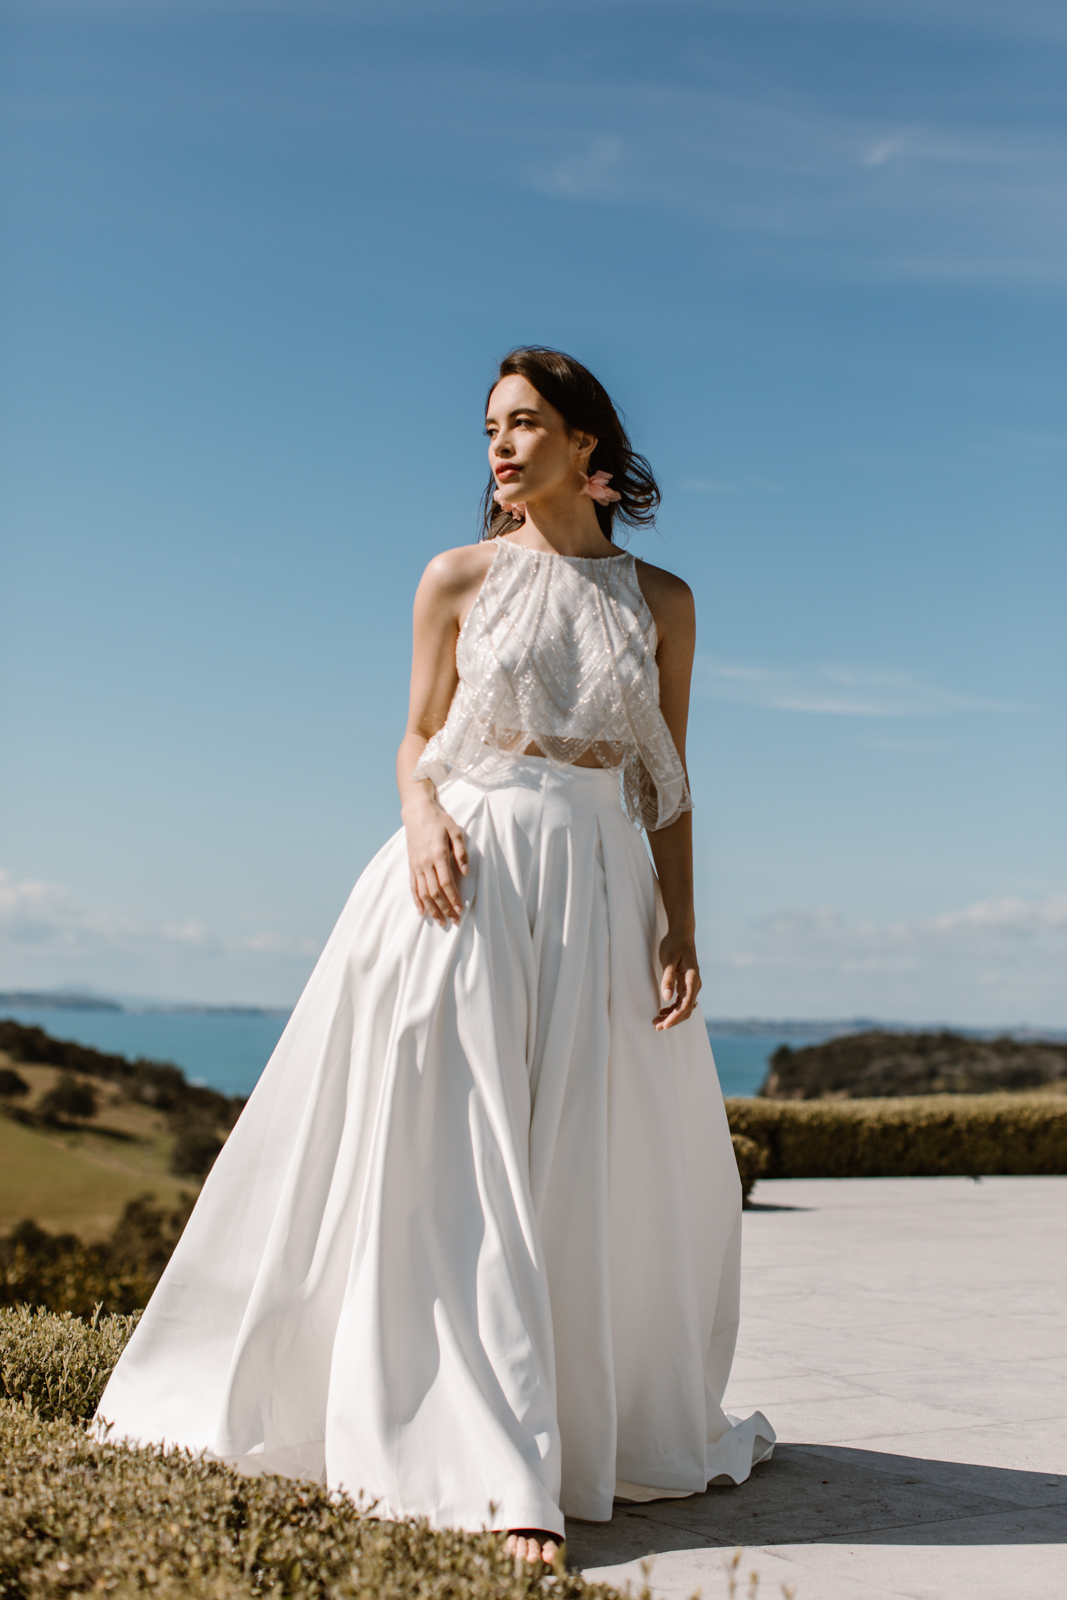 This wedding dress is the essence of love, from the soft illuison bodice to the fishtail shape and detachable half skirt which blooms behind